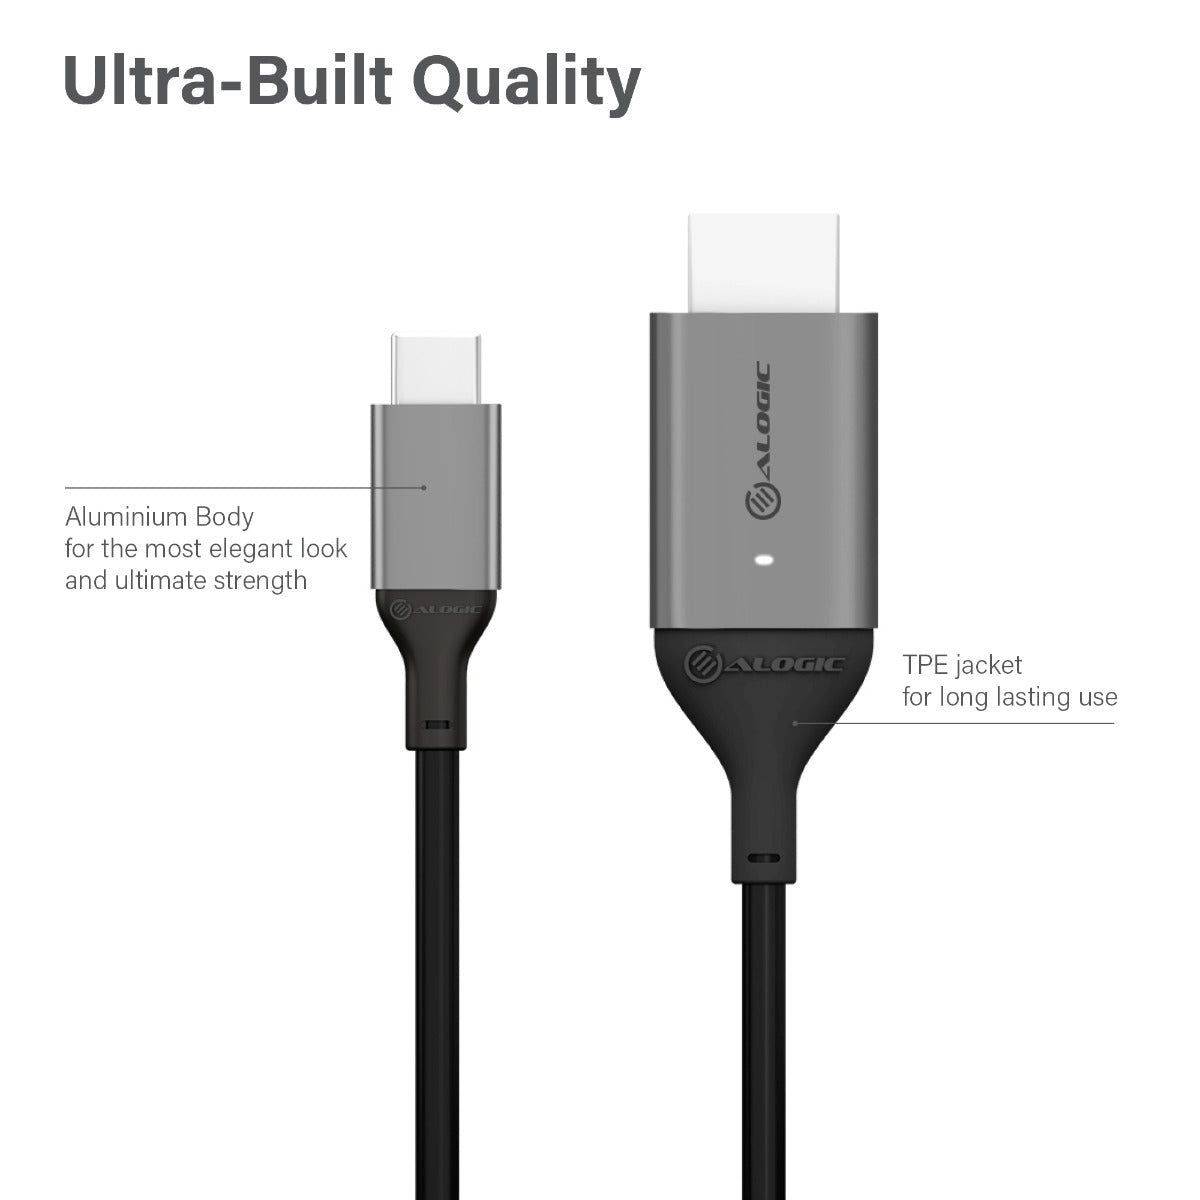 USB-C (Male) to HDMI (Male) Cable - Ultra Series - 4K 60Hz -Space Grey